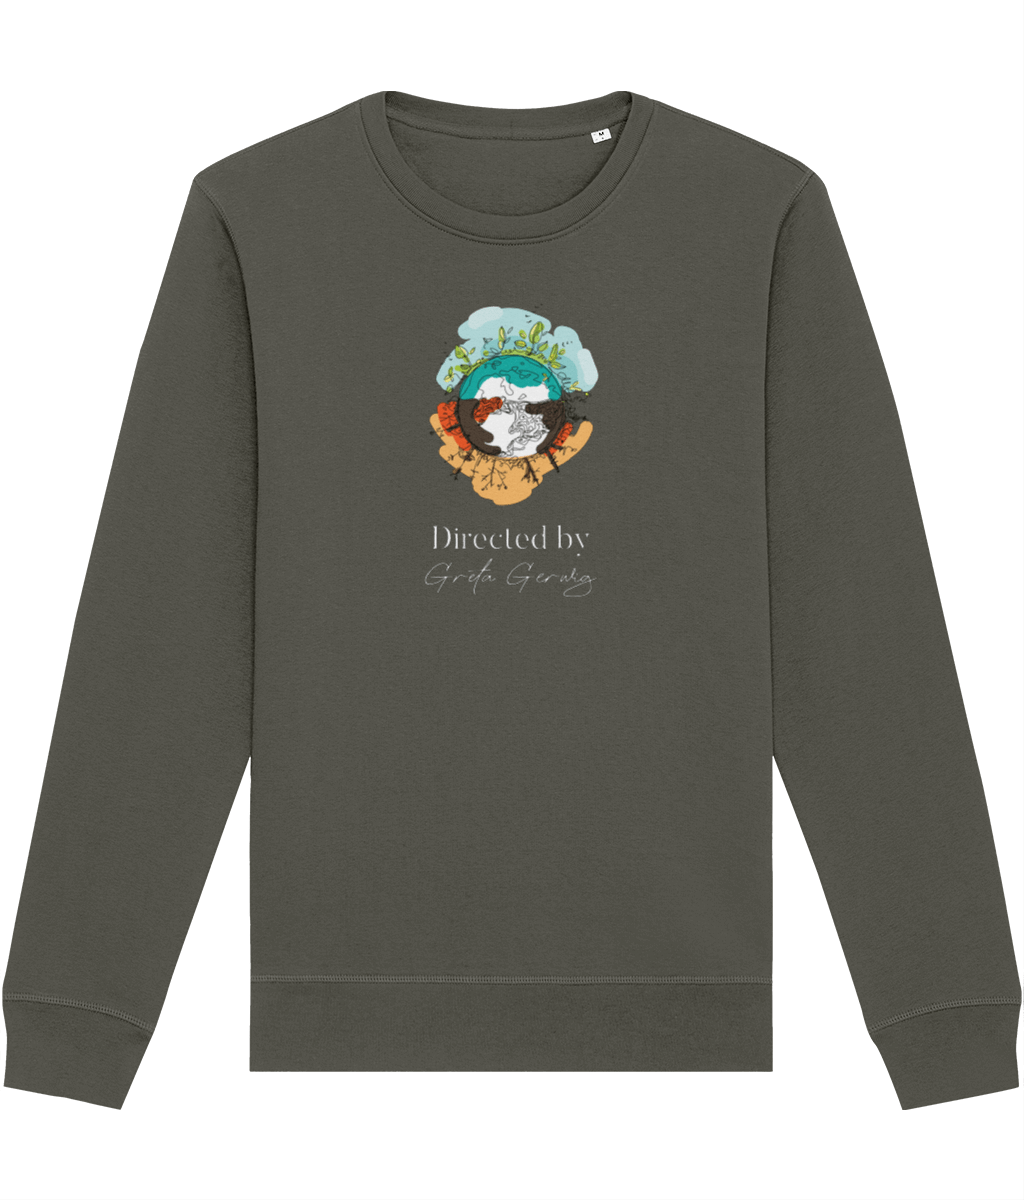 Climate Change 'Directed By Greta Gerwig' Organic Cotton Sweatshirt - Directed by Greta Gerwig